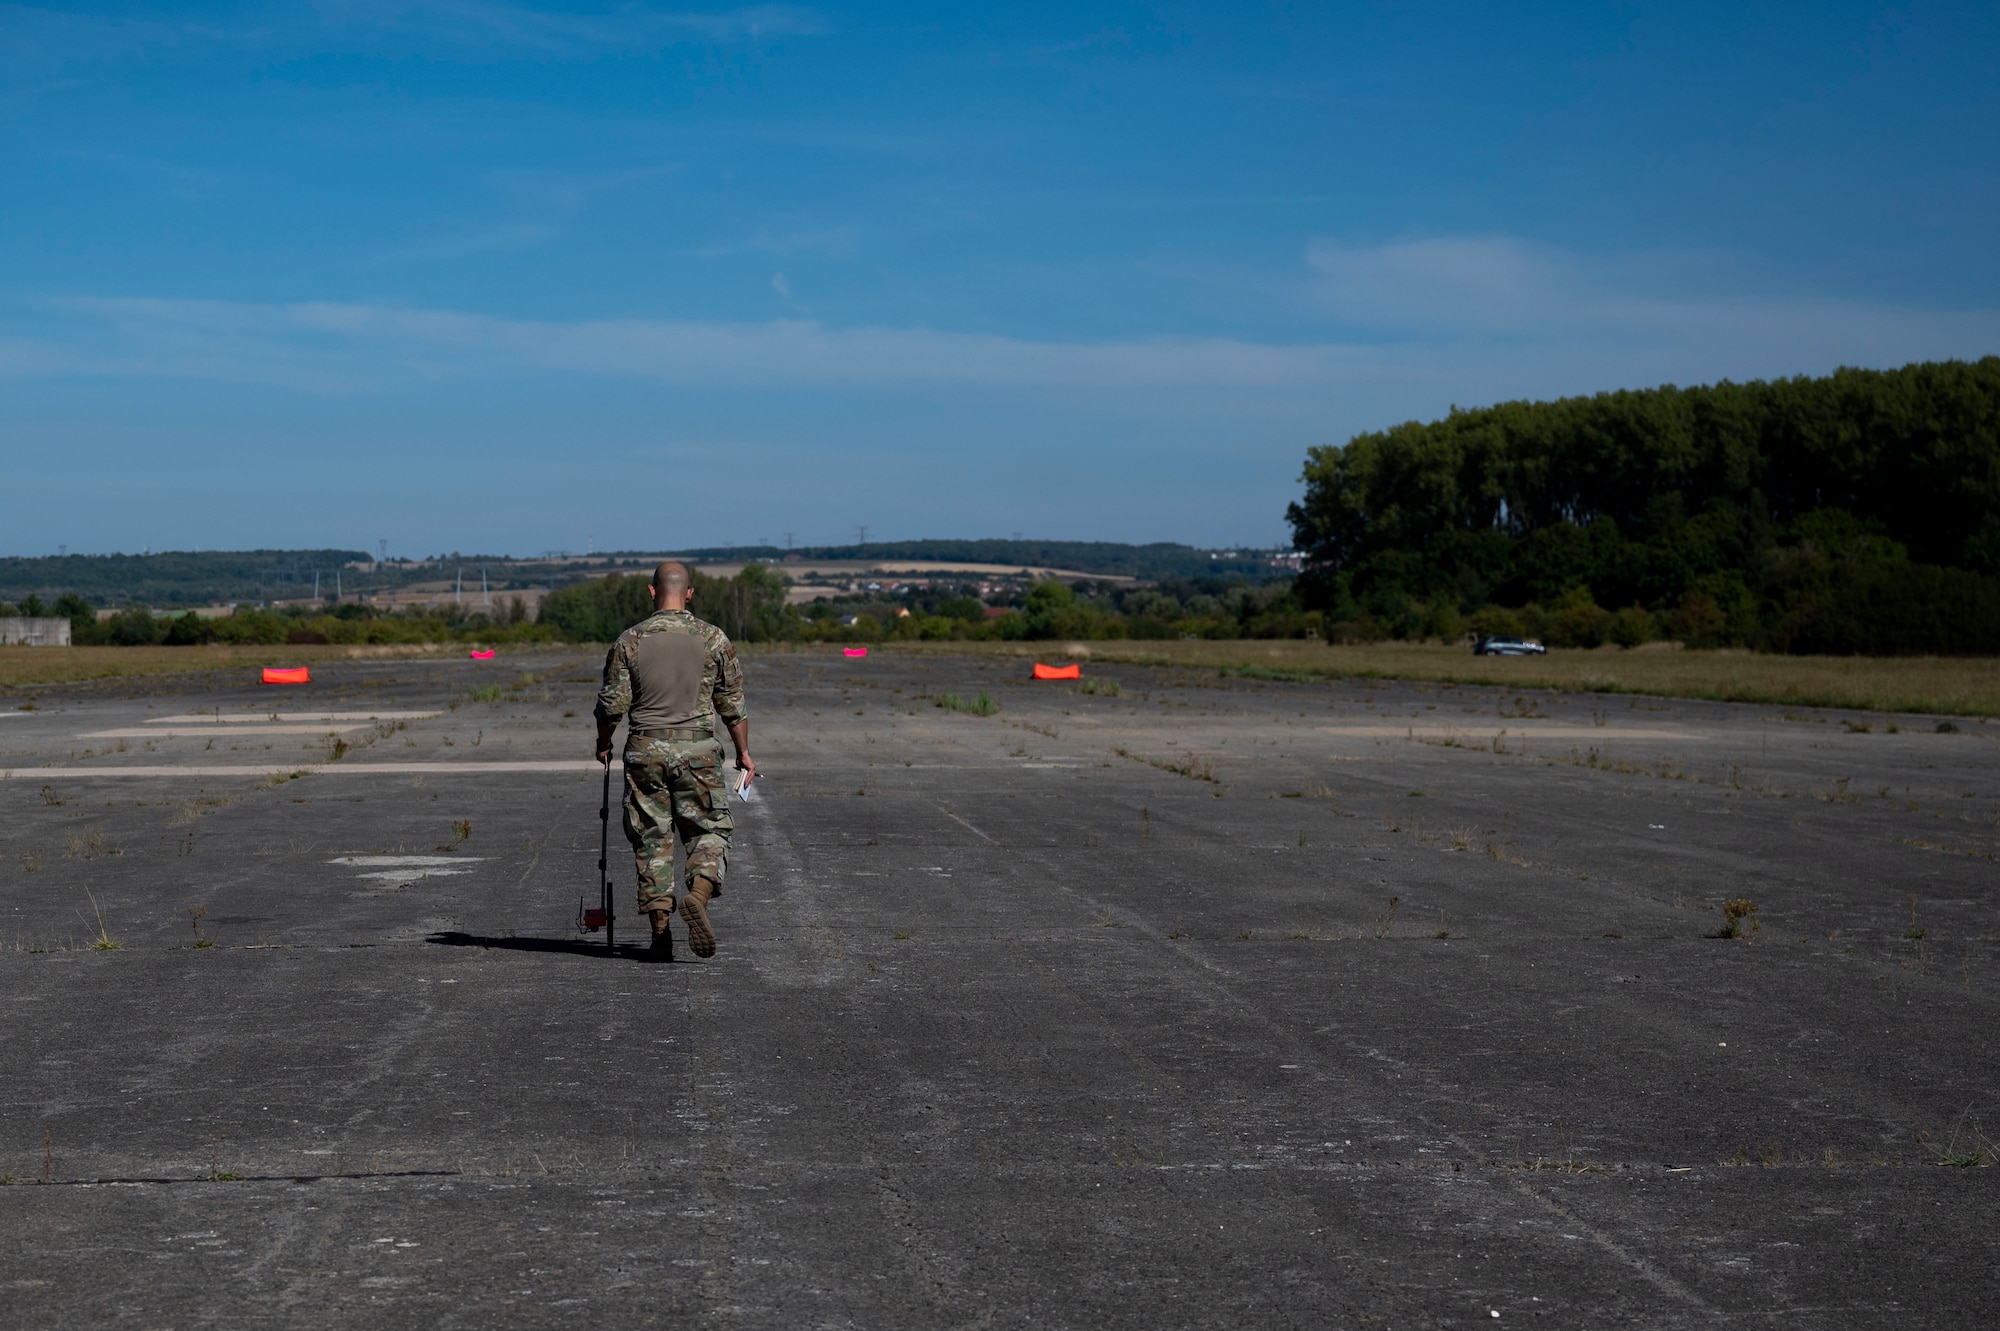 U.S. Air Force Master Sgt. Garrison Medina, 86th Operations Support Squadron, Air Traffic Control Standards and Evaluations noncommissioned officer in charge, measures distance on a runway in preparation for an airdrop at Base Aérienne Grostenquin, France, Aug. 26, 2022.